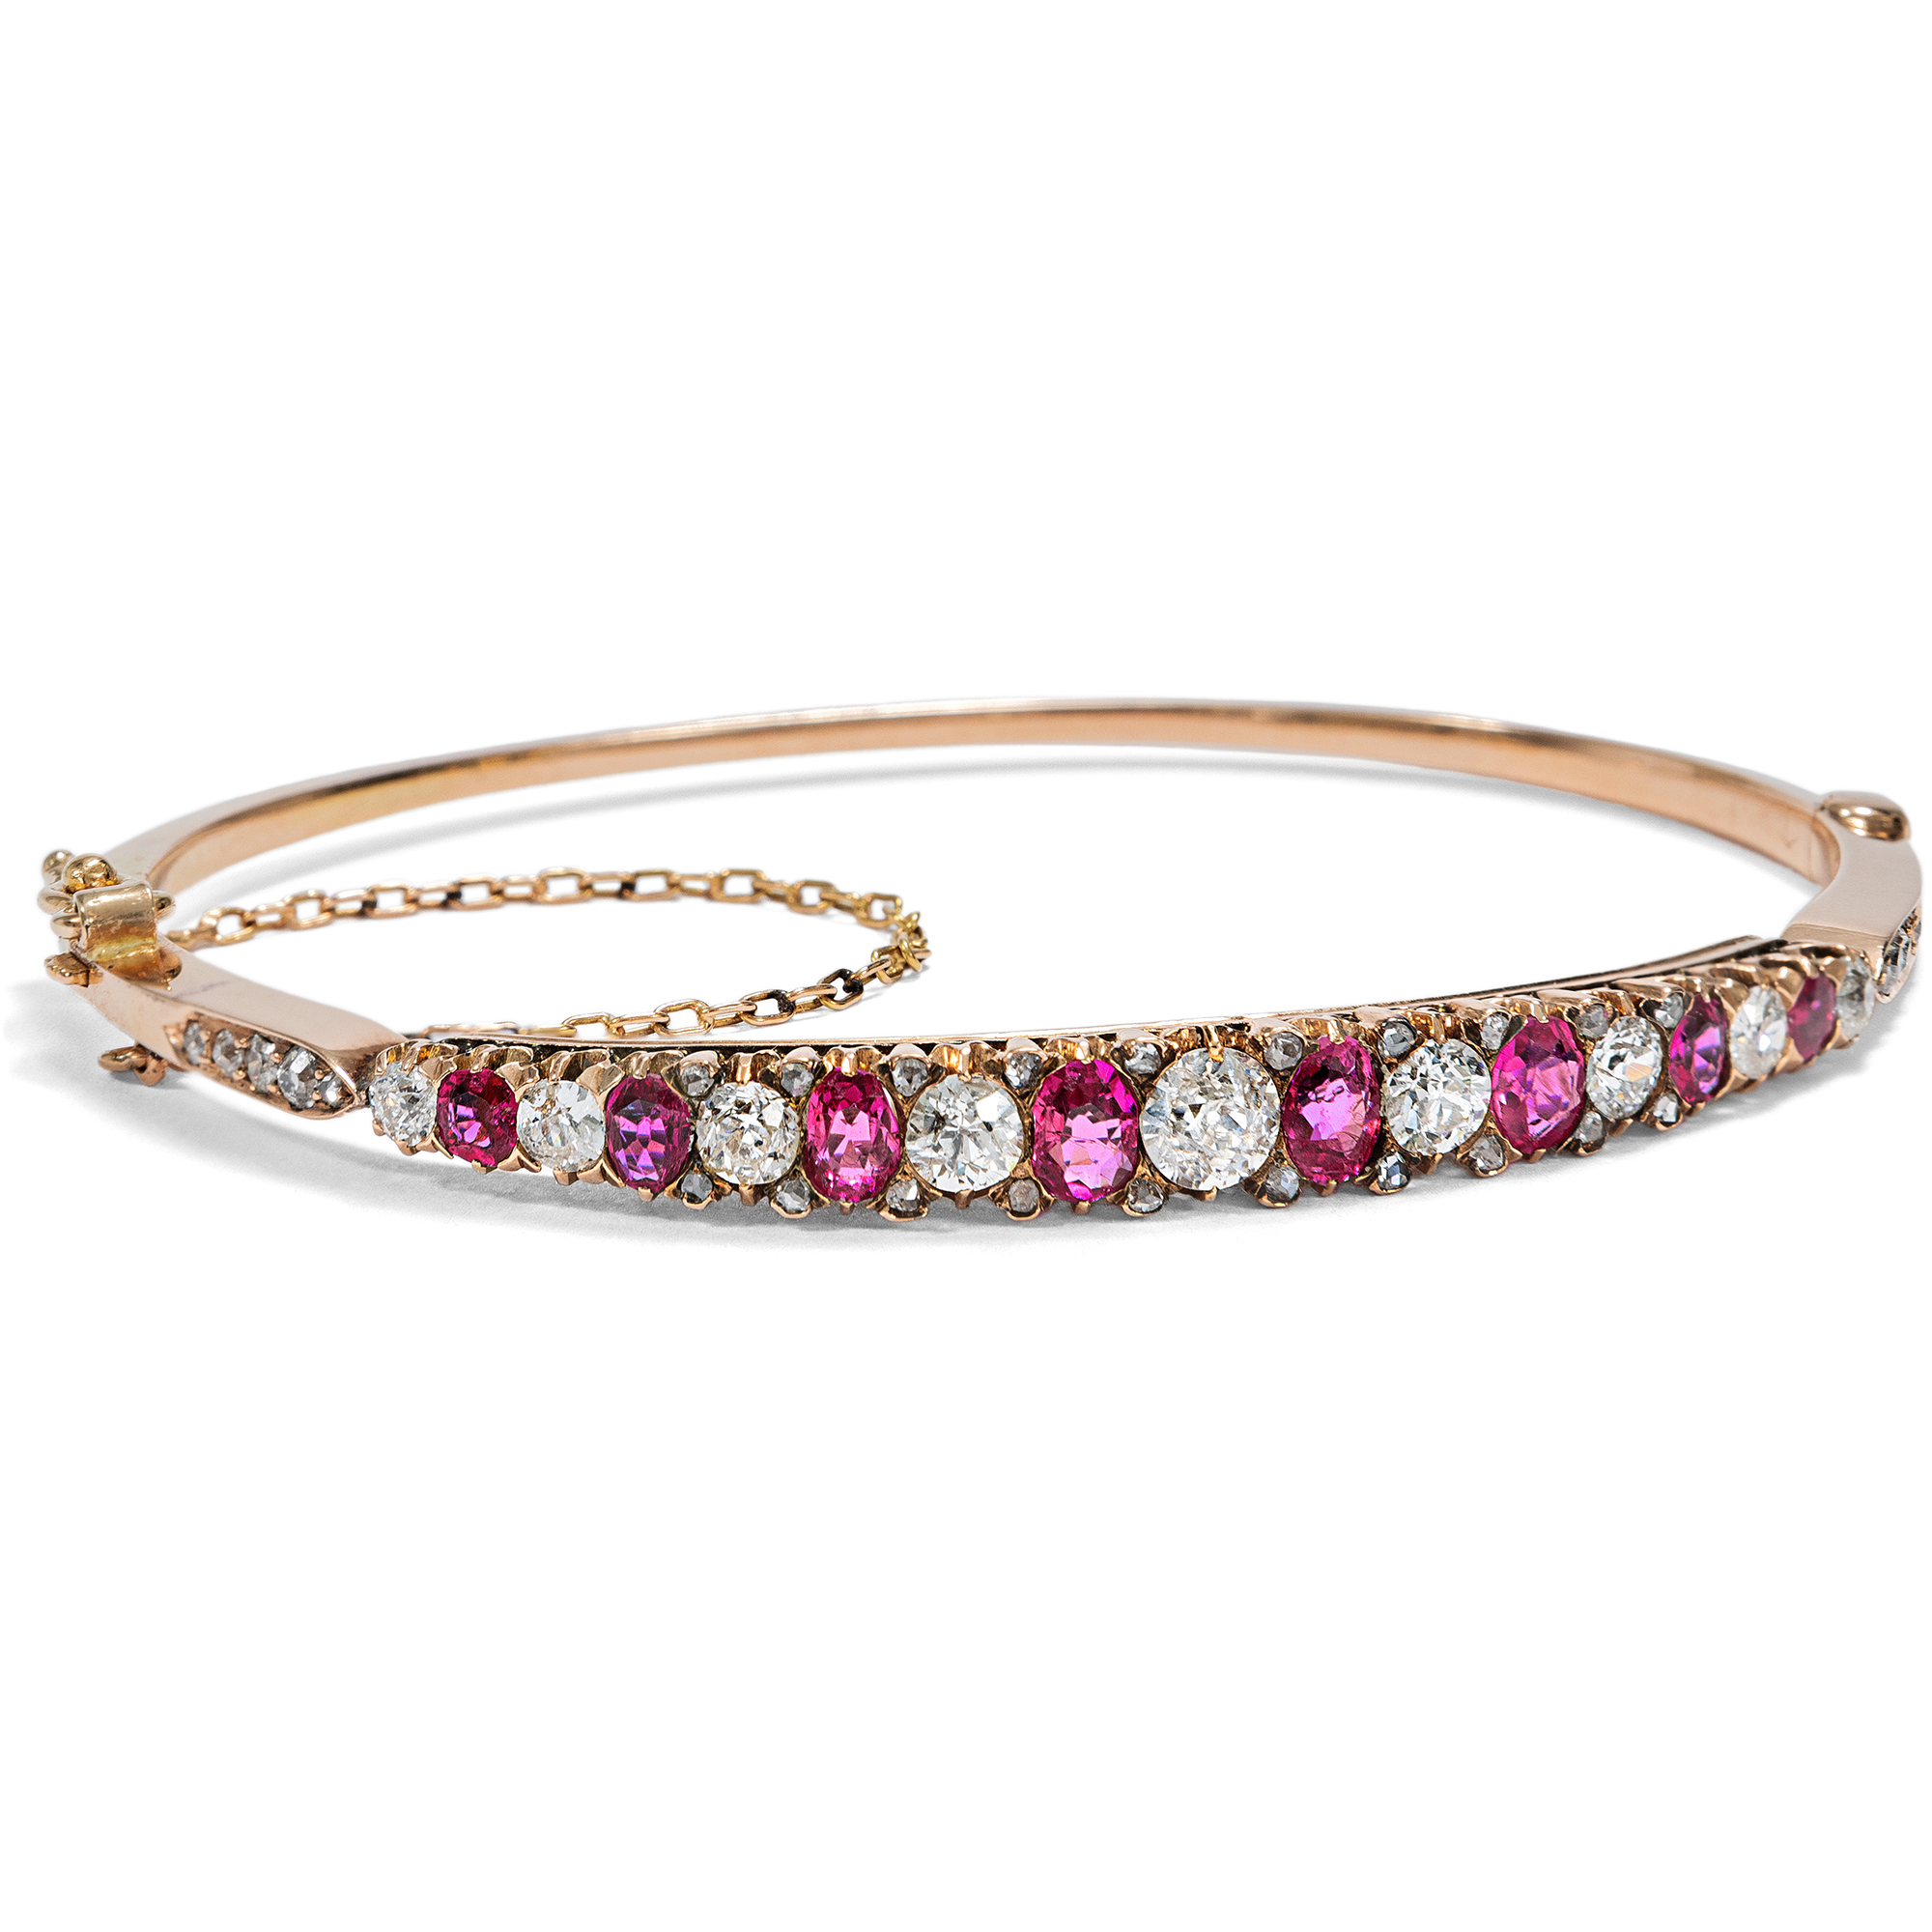 Antique Ruby and Diamond Bangle in Rose Gold, c. 1890s